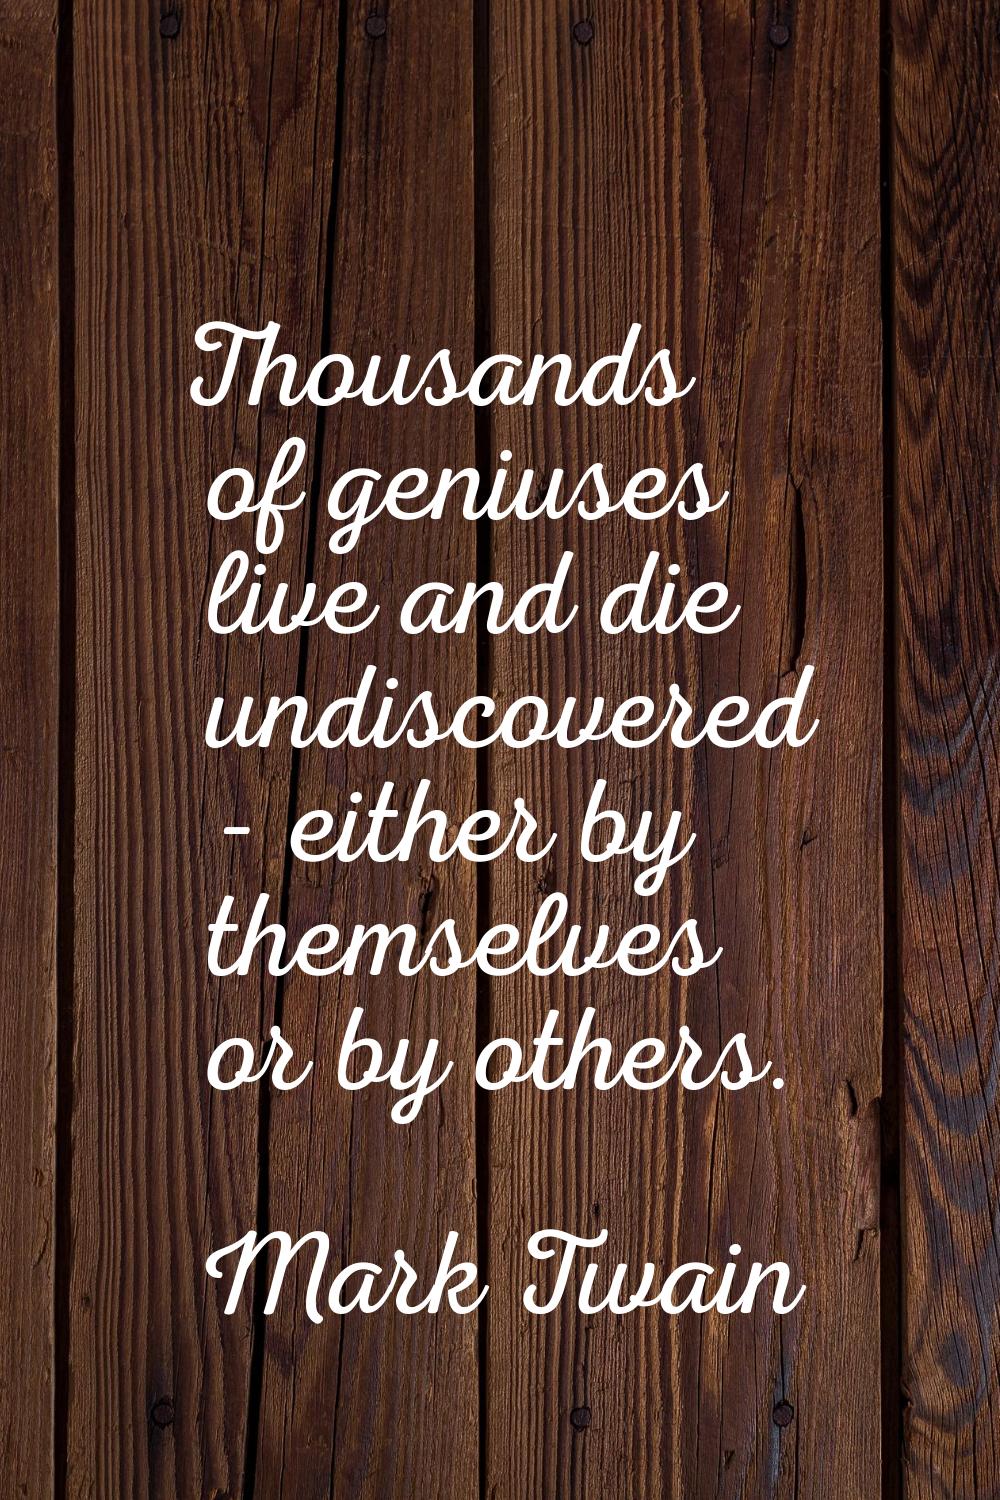 Thousands of geniuses live and die undiscovered - either by themselves or by others.